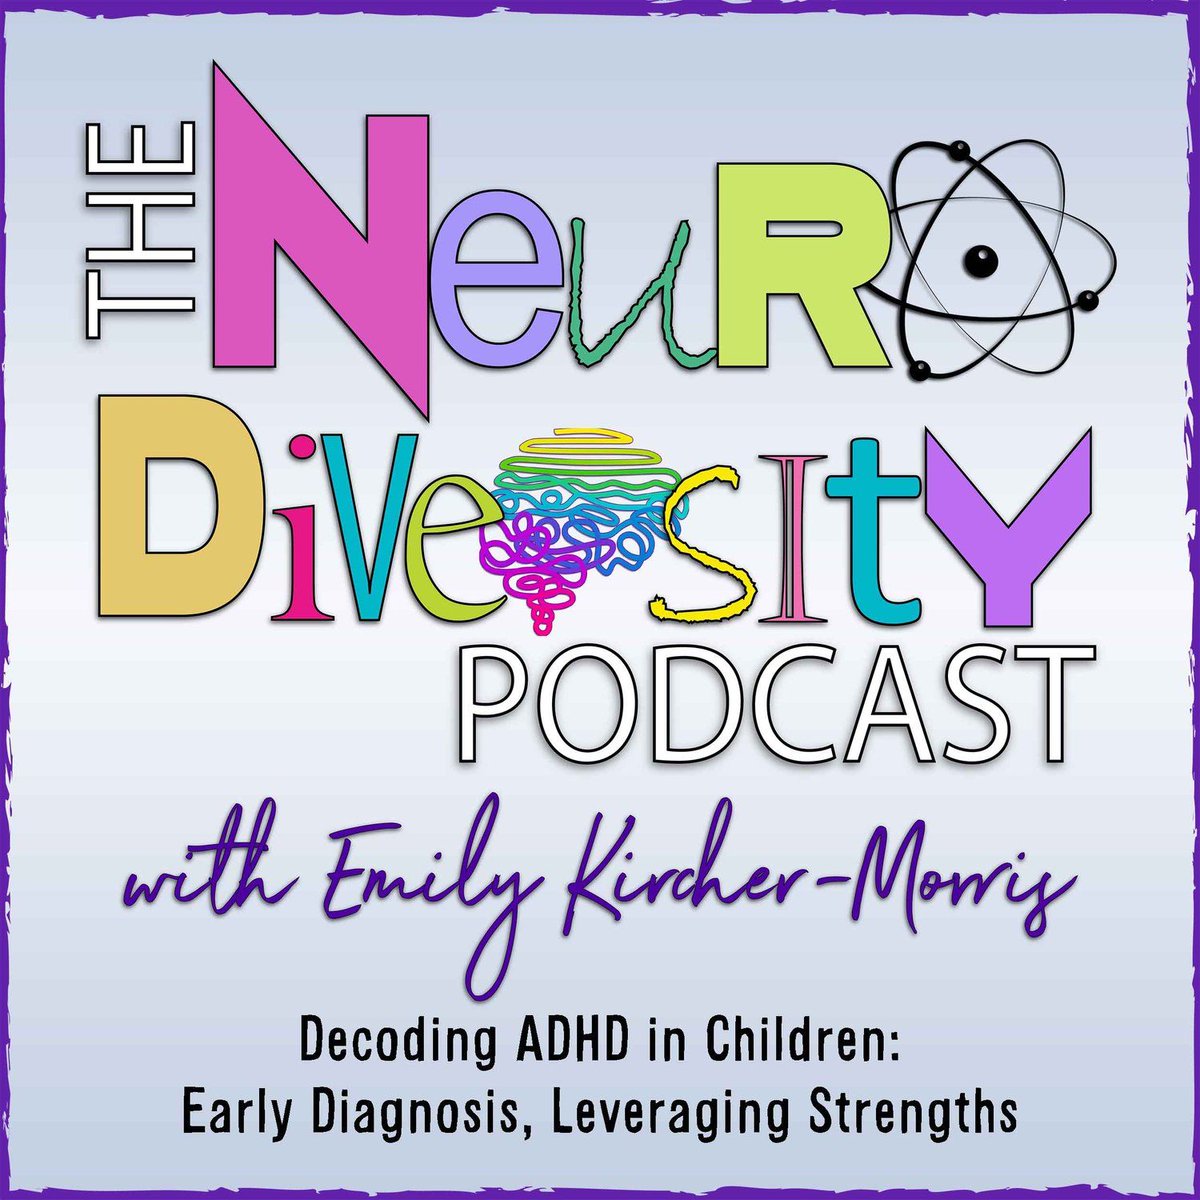 Today we’re tackling the challenge of decoding ADHD in children, chatting with pediatric neuropsychologists Drs. Yael Rothman and Katia Fredriksen! buff.ly/3JI3bZk 
#neurodiversitypodcast #neurodiversity #neurodivergent #neurodiverse #ADHD #earlydiagnosis @NeuropsychMoms